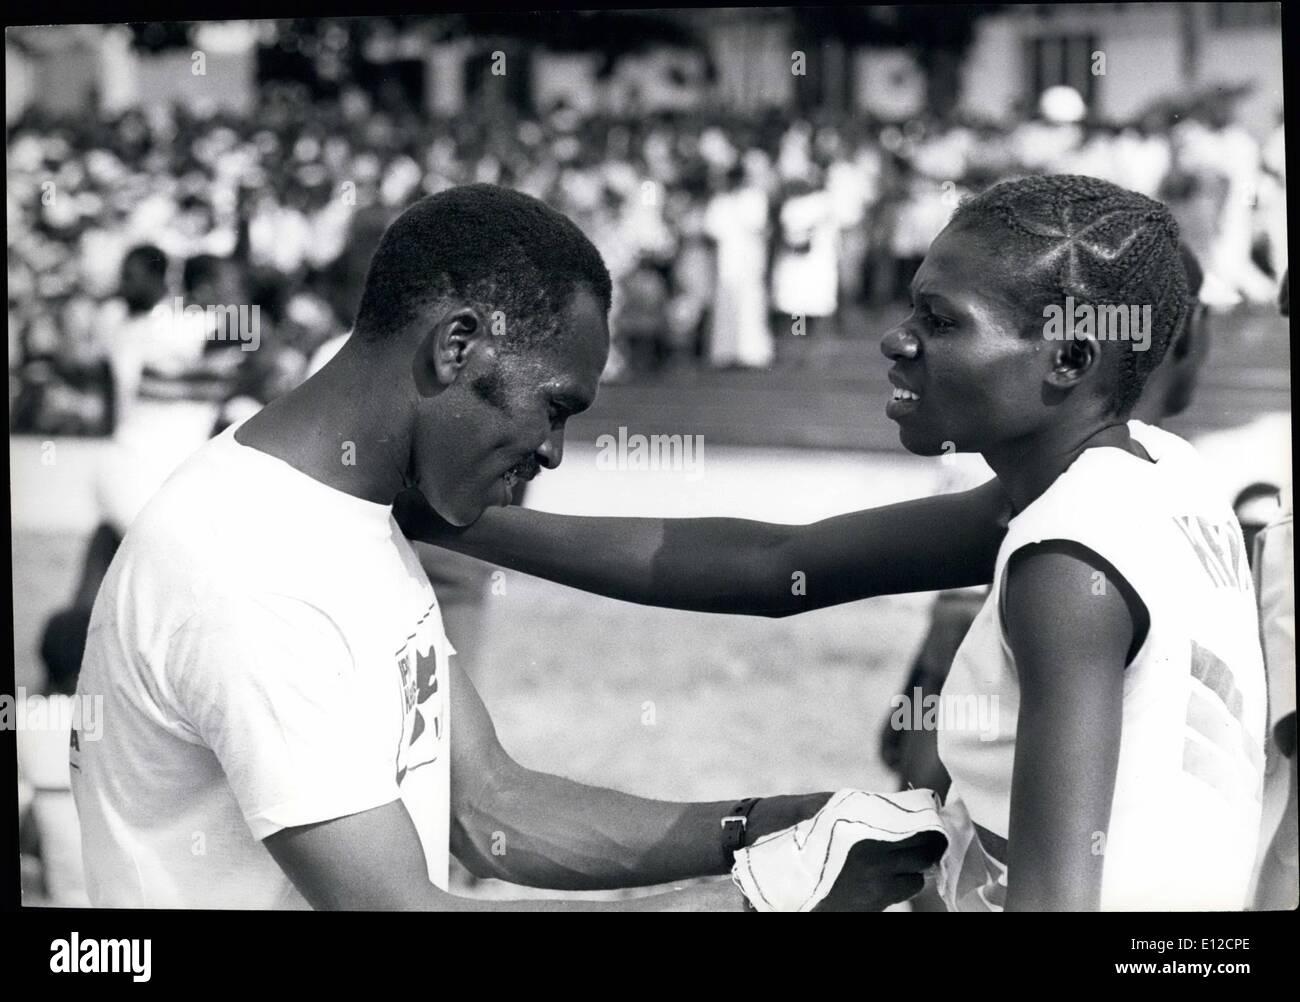 Dec. 16, 2011 - Kenya: sports: Adala: Alice Adala: sprinter, qualified for Montreal Olympics with a time of 23.5 sec in the 200m. Has long been Kenya's top women sprinter, and track career dates back to mind- sixties when she completed for her secondary school. Holds the Kenya records in 100m at 11.7 sec and 200 meters in 23.5 sec. Pictured here with Kip Keino. An inspector of Police stationed at the Kenya Police College. Stock Photo